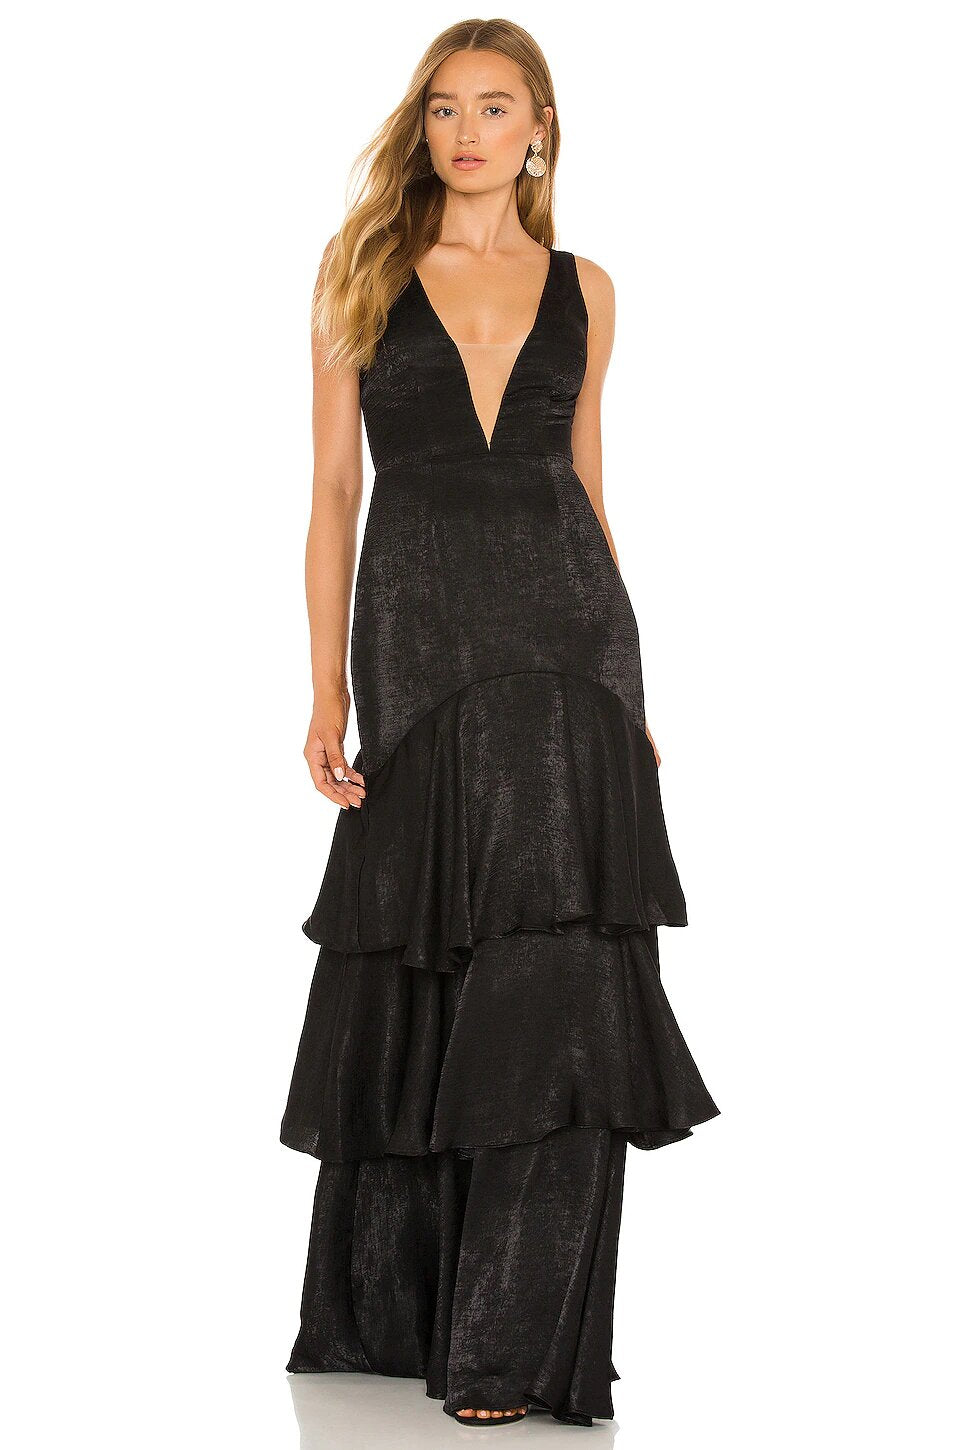 Katie May  - Old Money Gown - Black